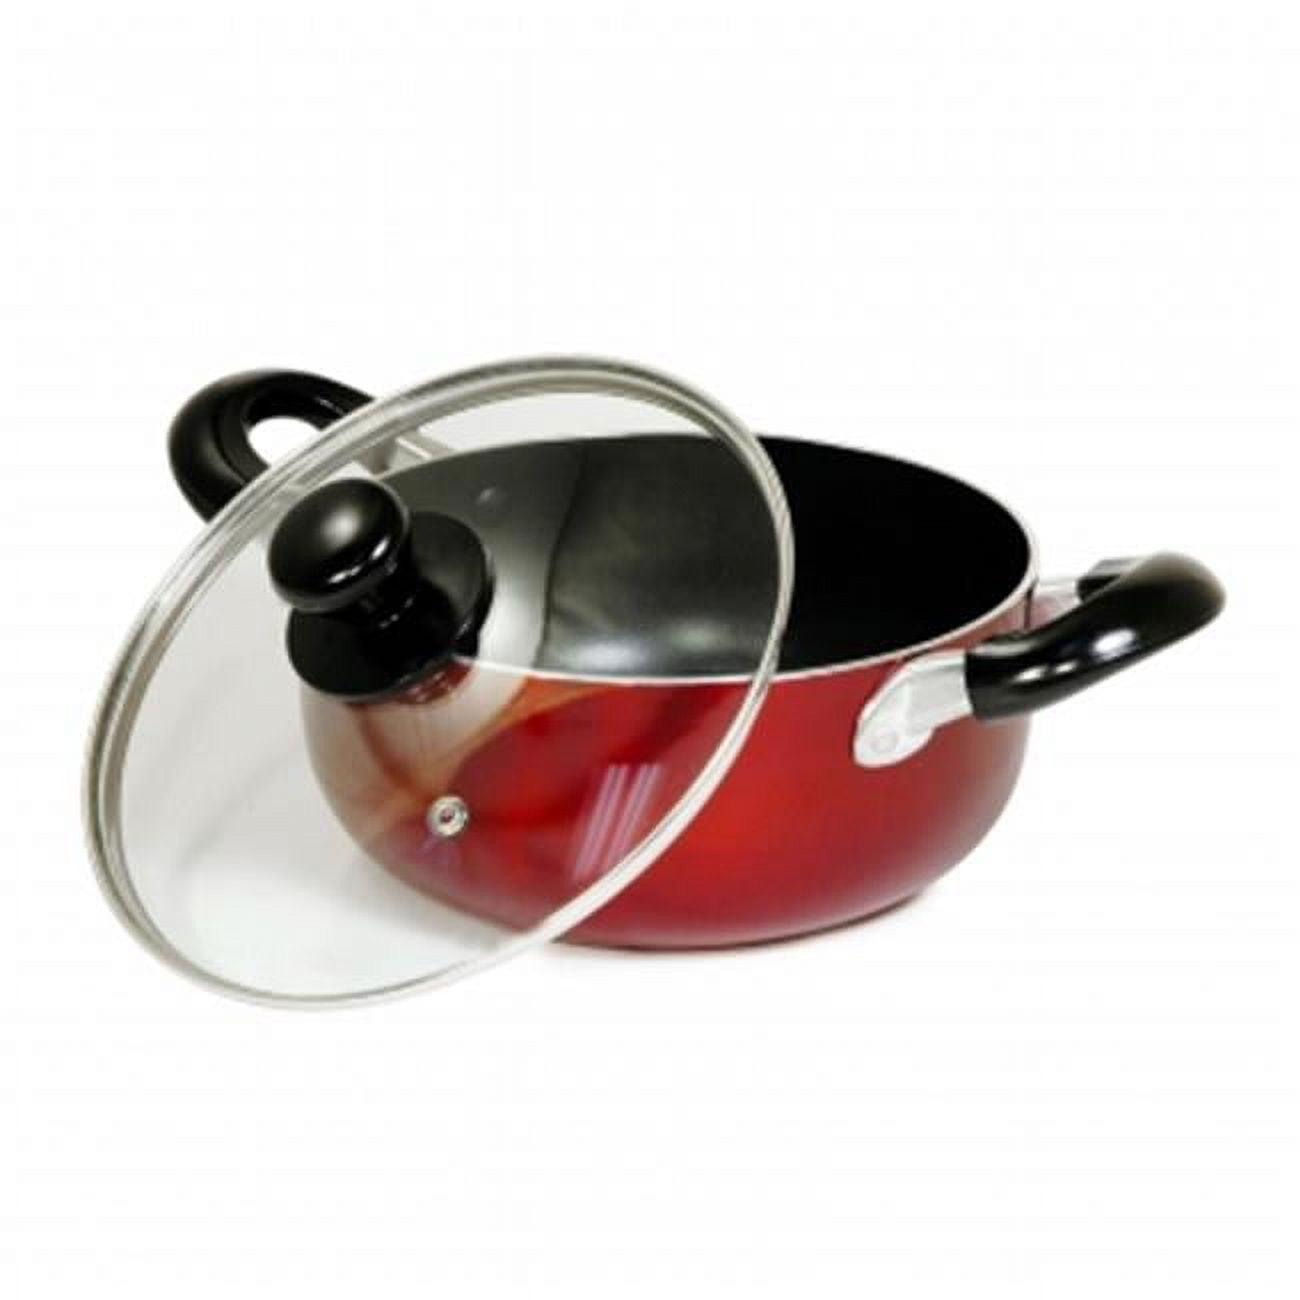 5 Qt. Aluminum Non-Stick Dutch Oven with See-Through Lid